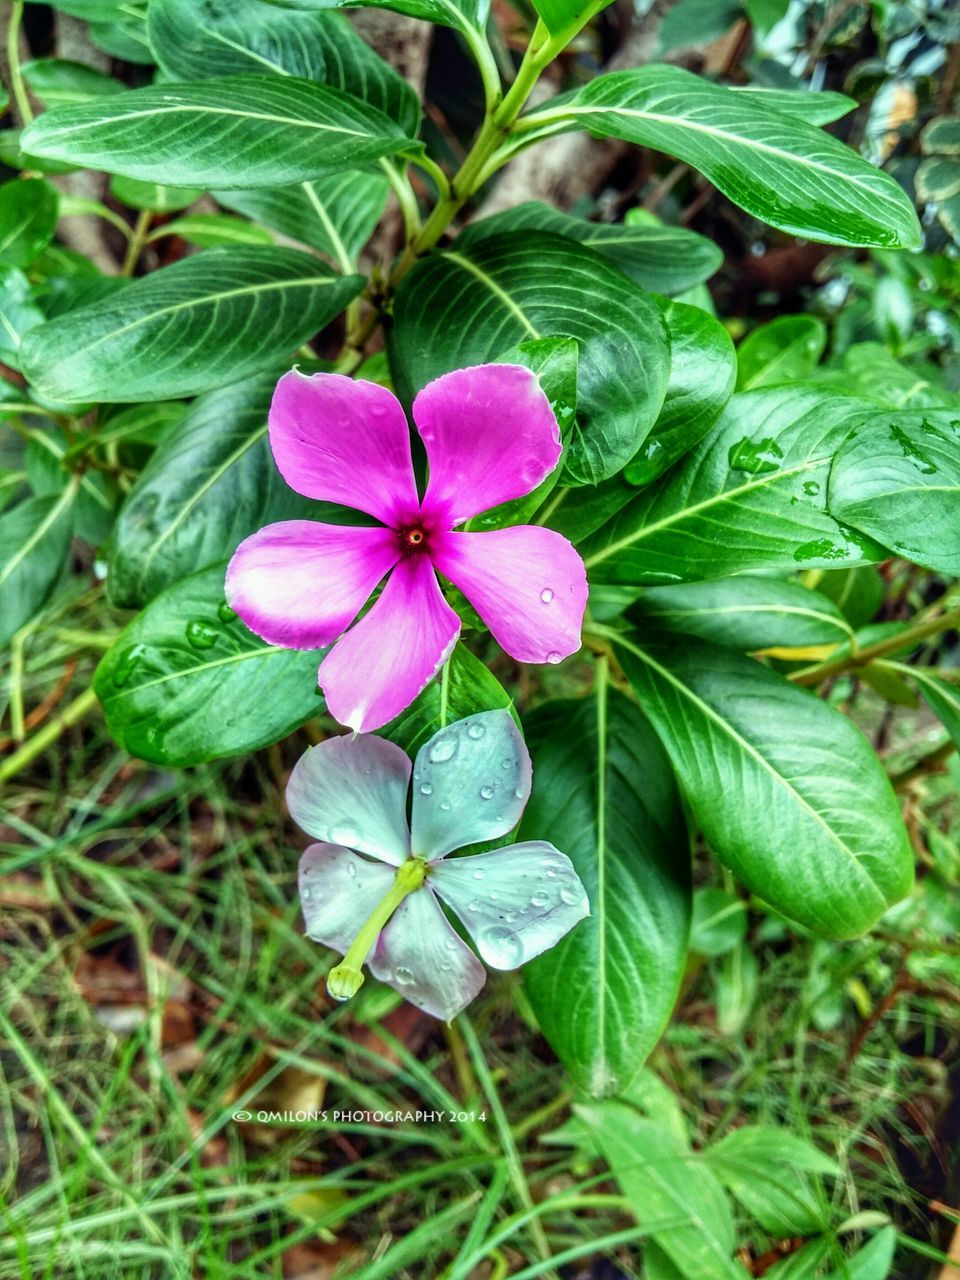 flower, freshness, growth, petal, fragility, leaf, flower head, beauty in nature, plant, blooming, nature, purple, close-up, green color, high angle view, pink color, focus on foreground, in bloom, day, single flower